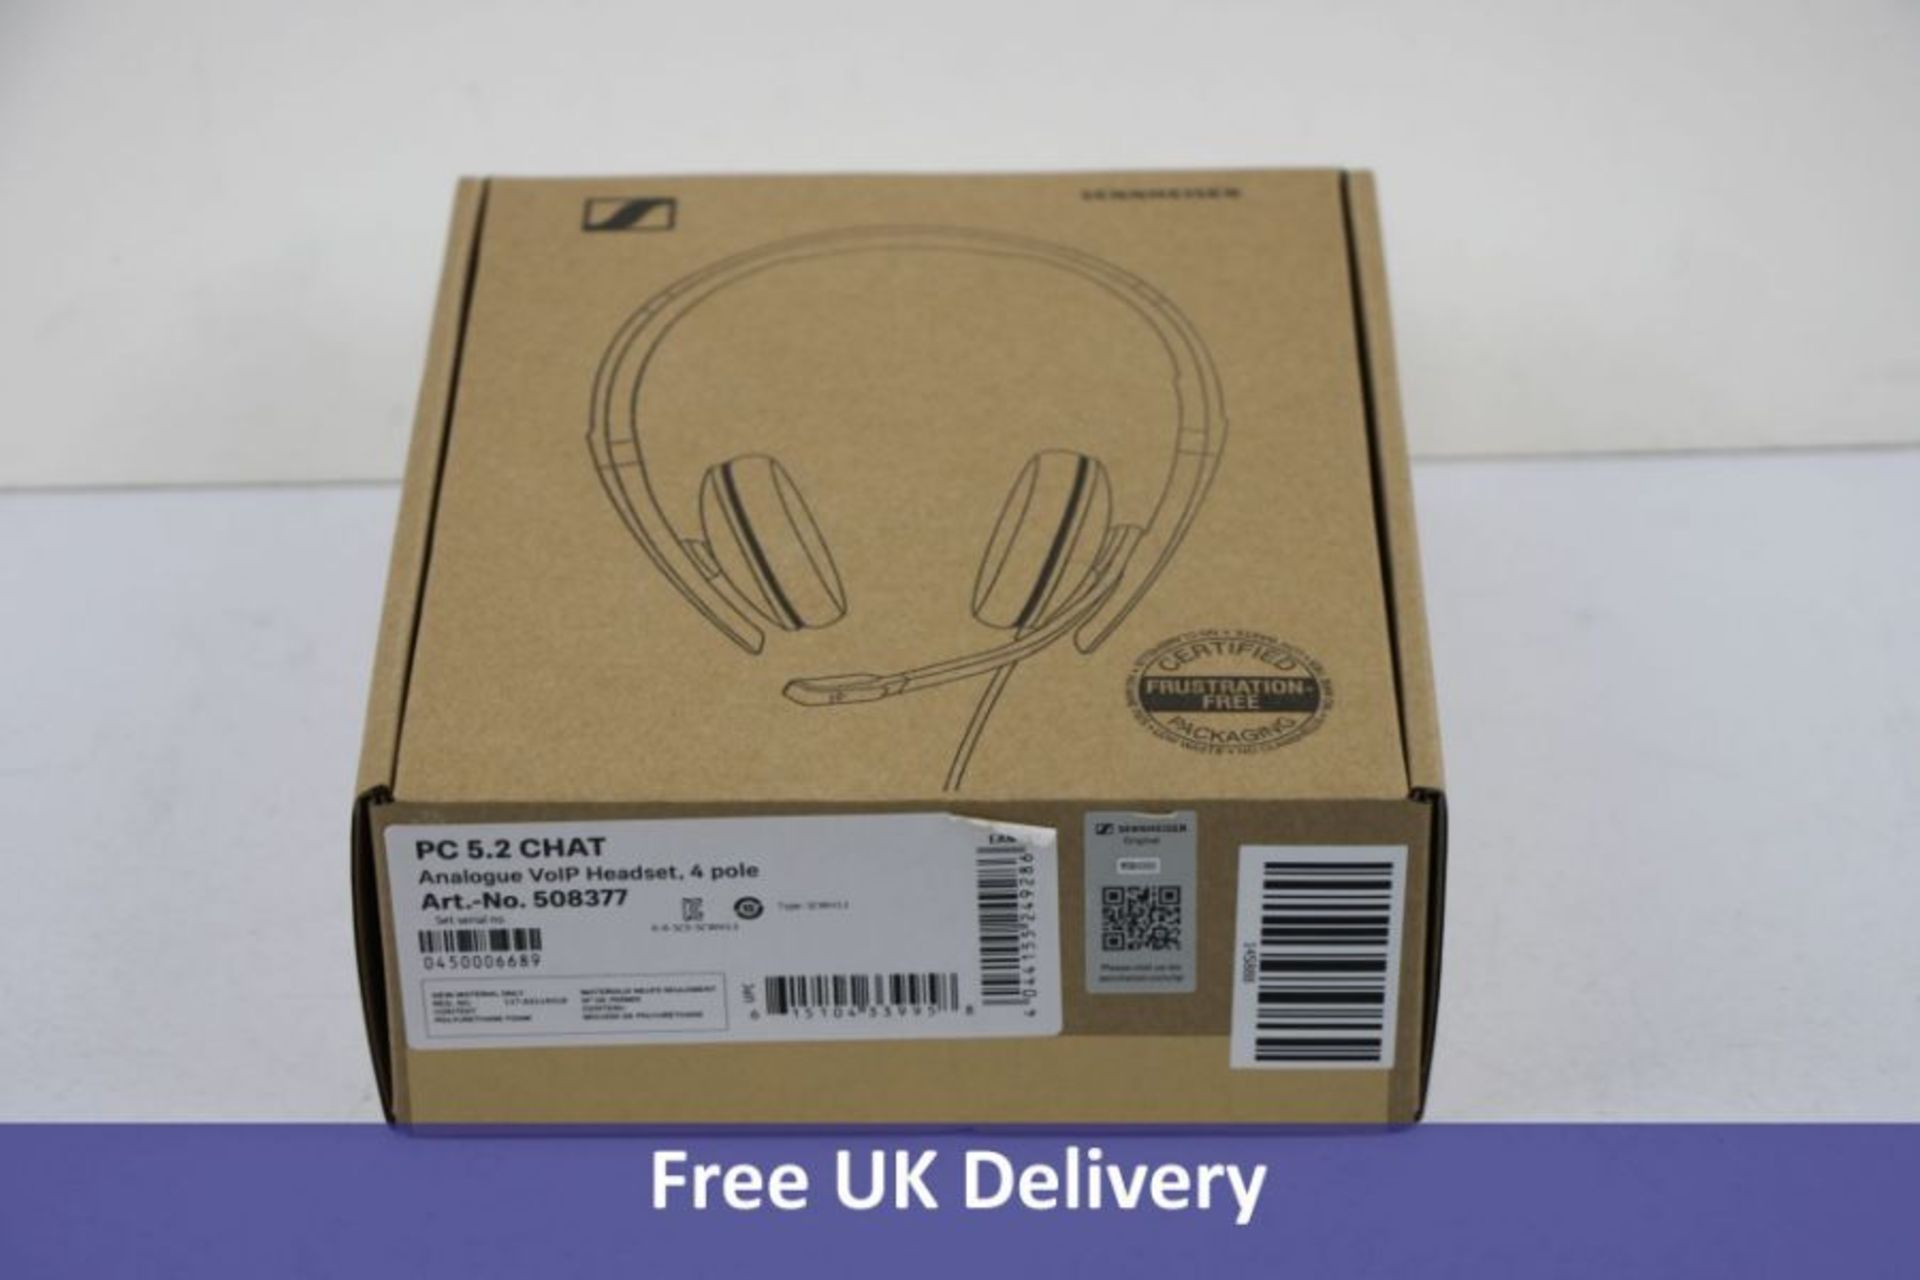 Sennheiser PC 5.2 CHAT Wired Headset, 3.5 mm Jack, 4 Plug Pole Connectivity